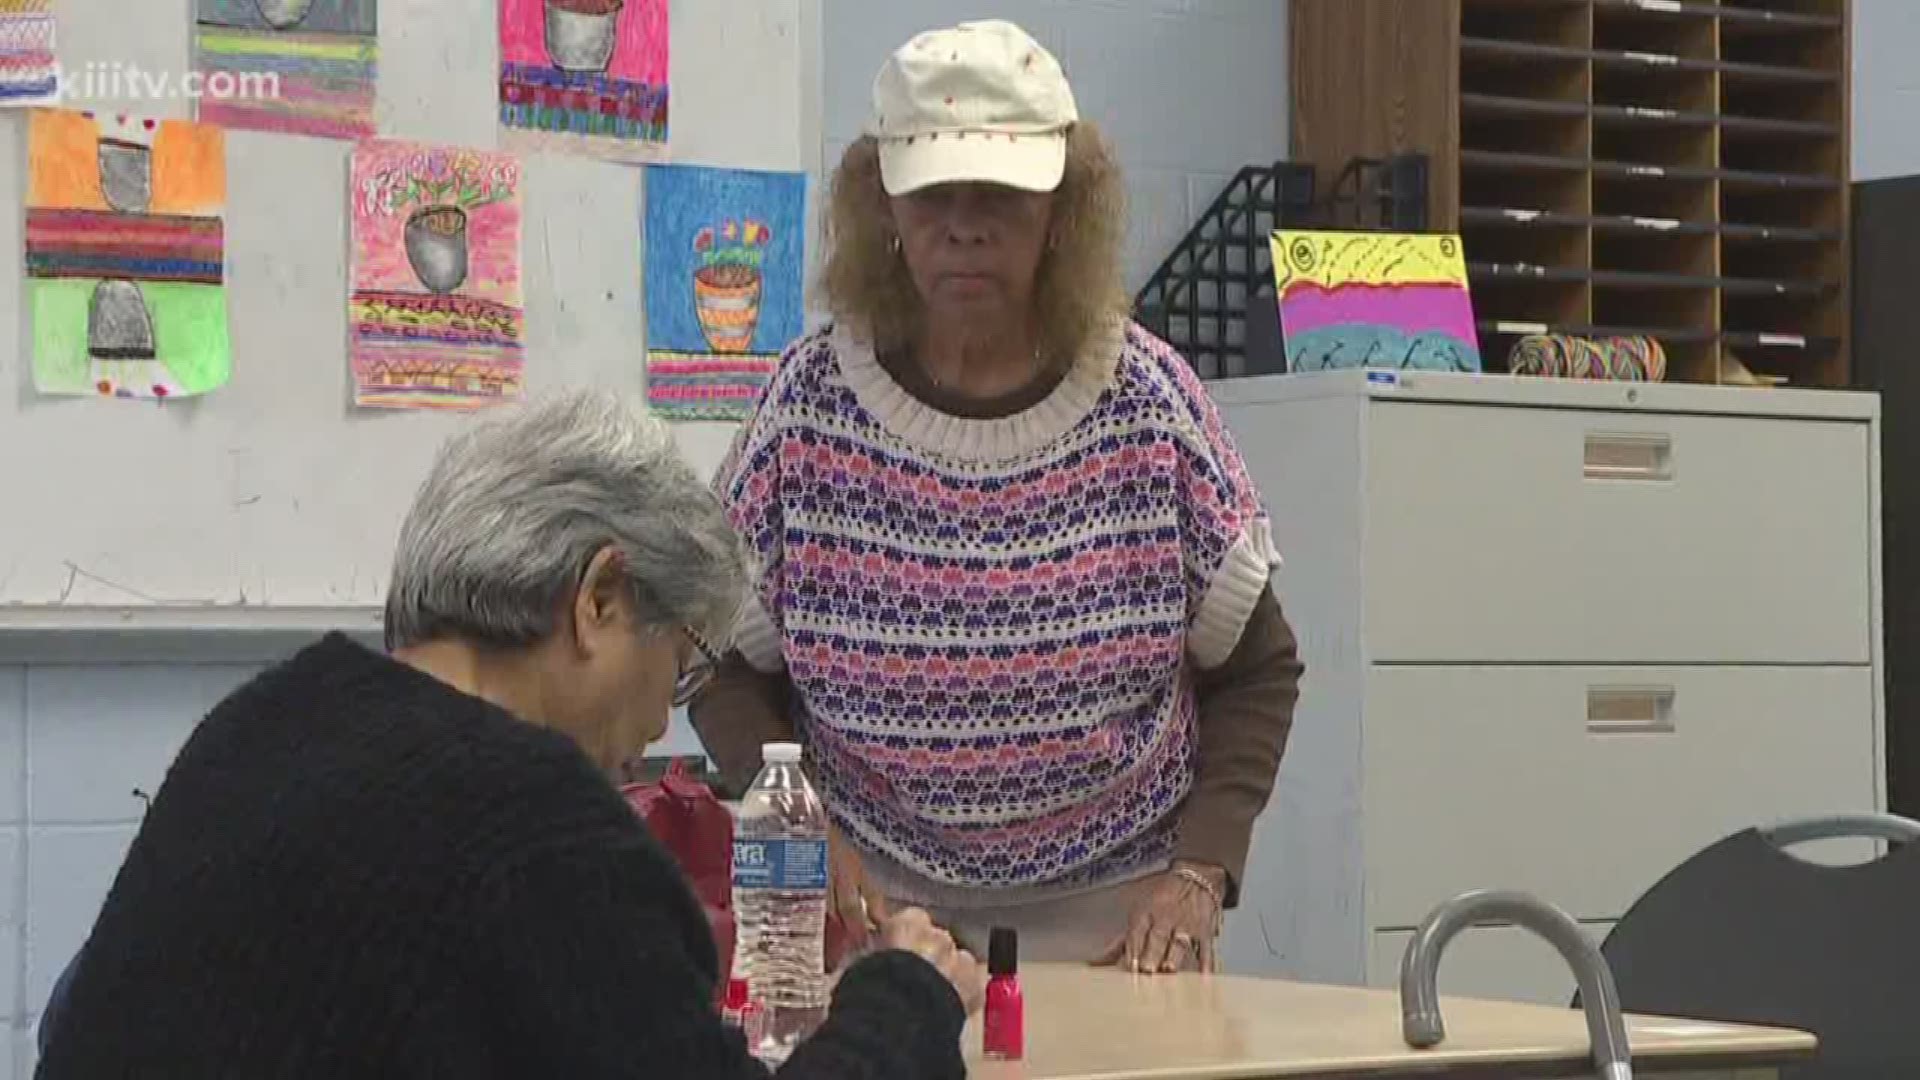 A Corpus Christi woman is helping senior citizens embrace the spirit of volunteering while enjoying some one-on-one attention.